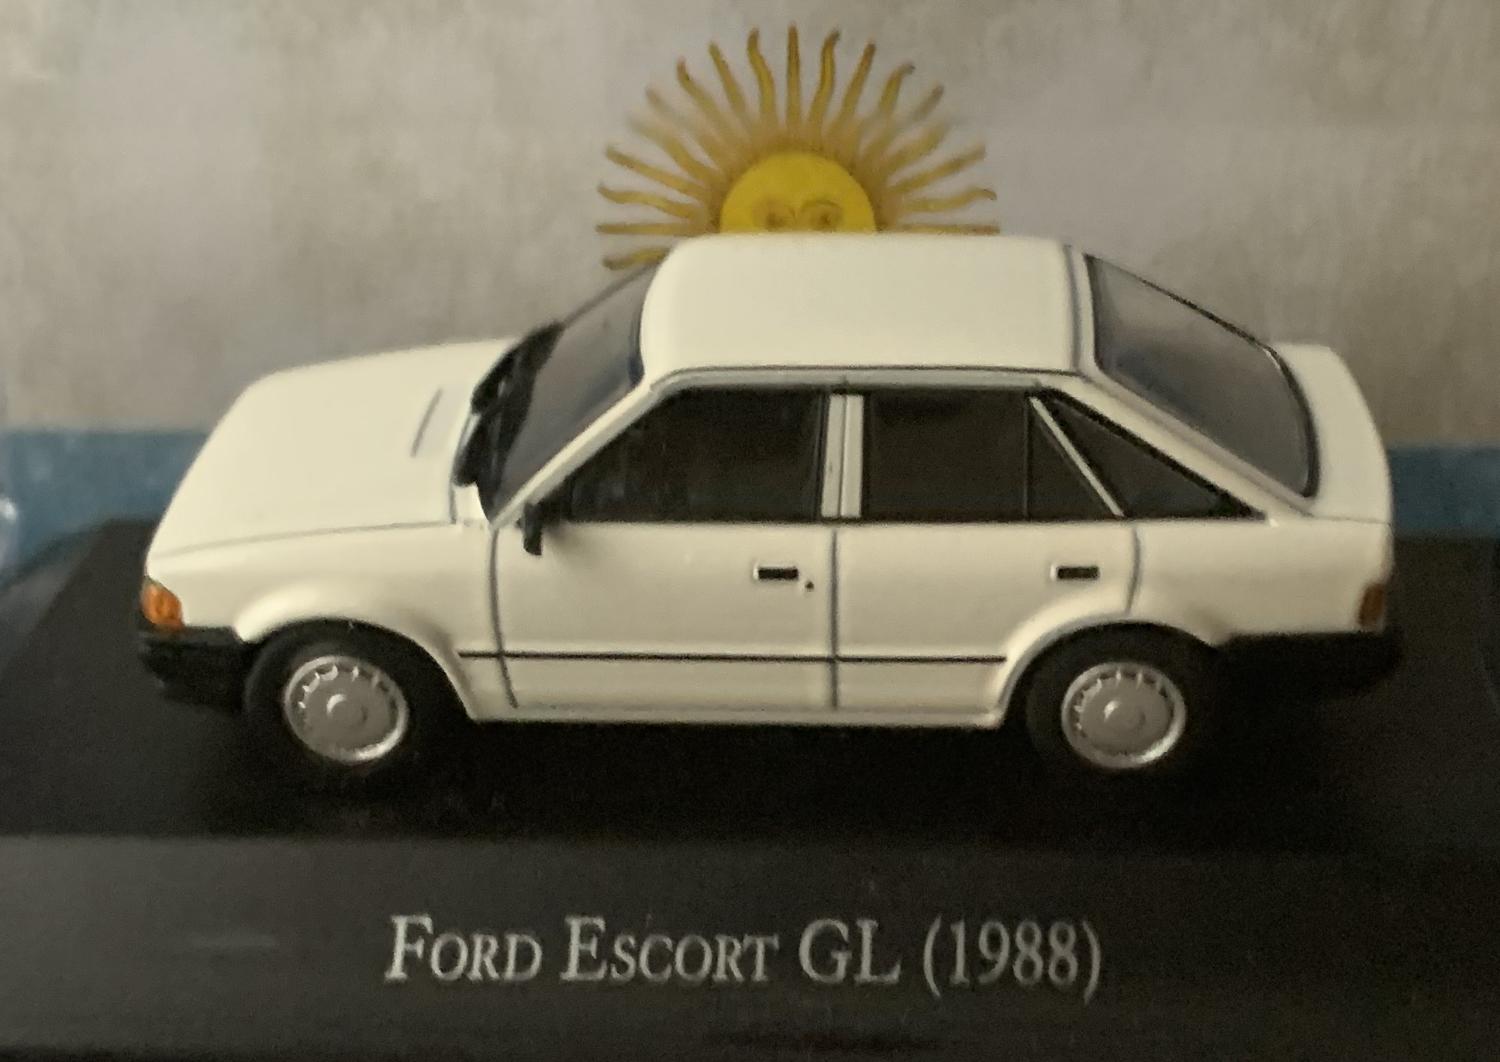 The model shown here is a good example of a Ford Escort GL from 1988 finished in white with black chassis and working wheels